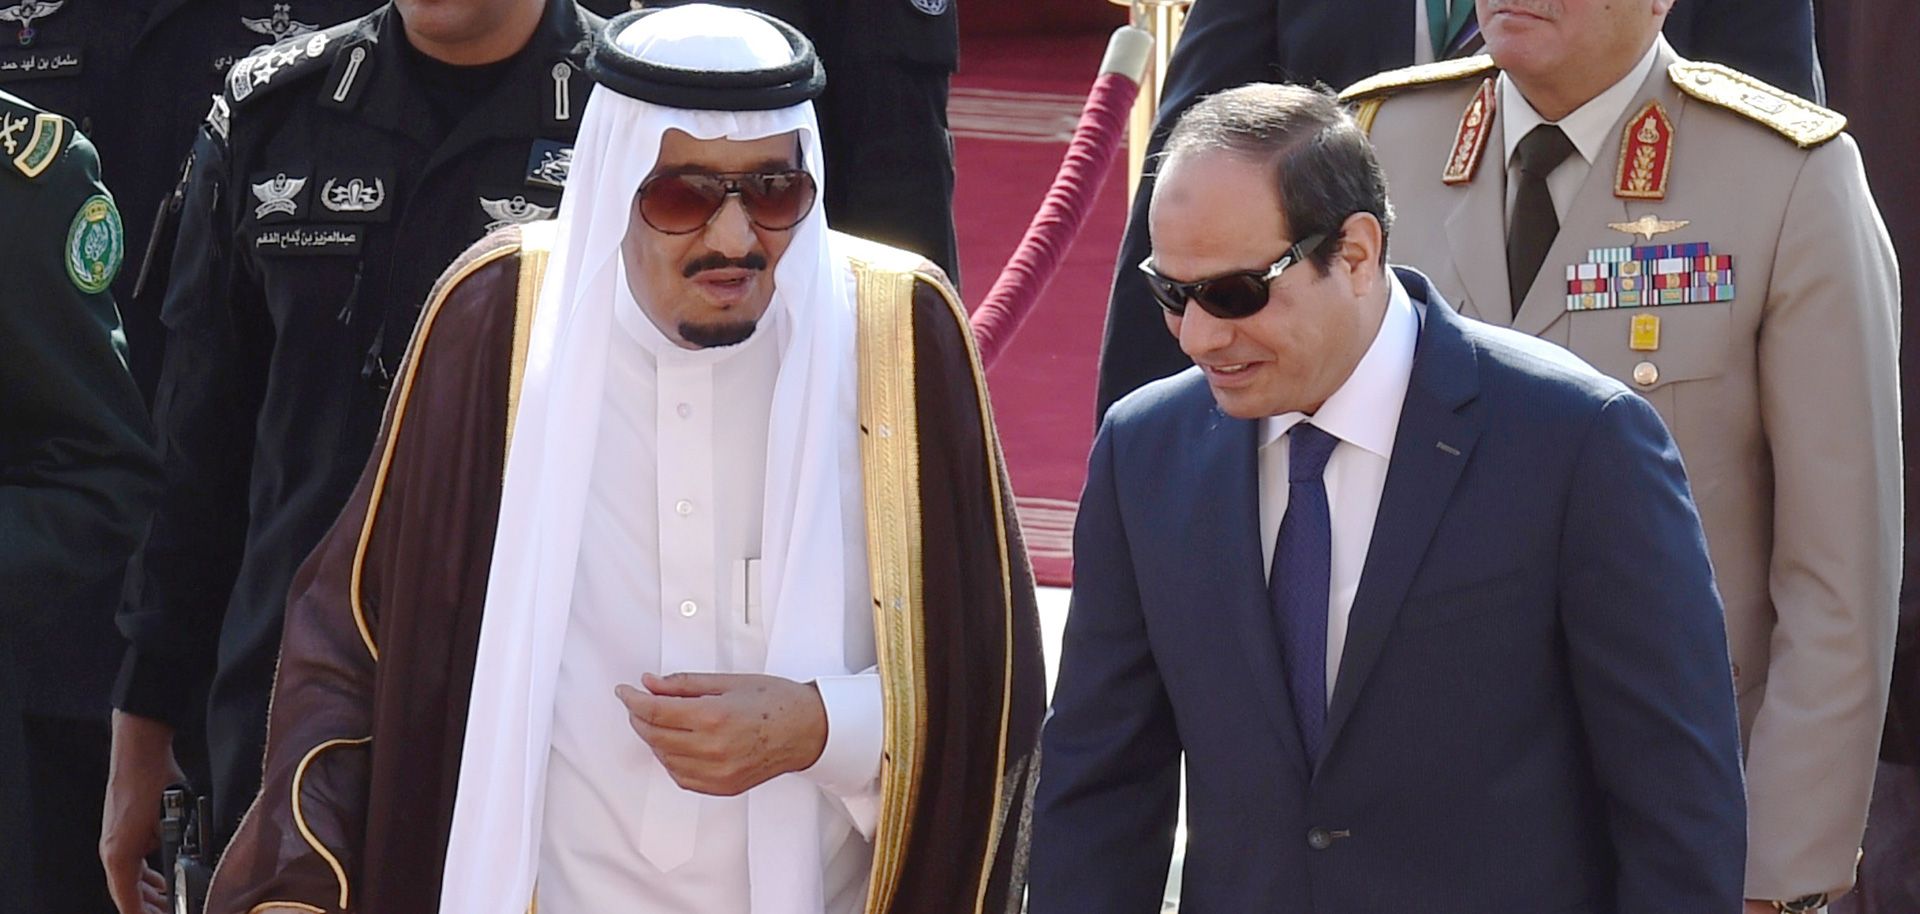 During the past several months, Saudi Arabia's relationship with Egypt has become more strained, but neither country can afford to turn its back on the other.